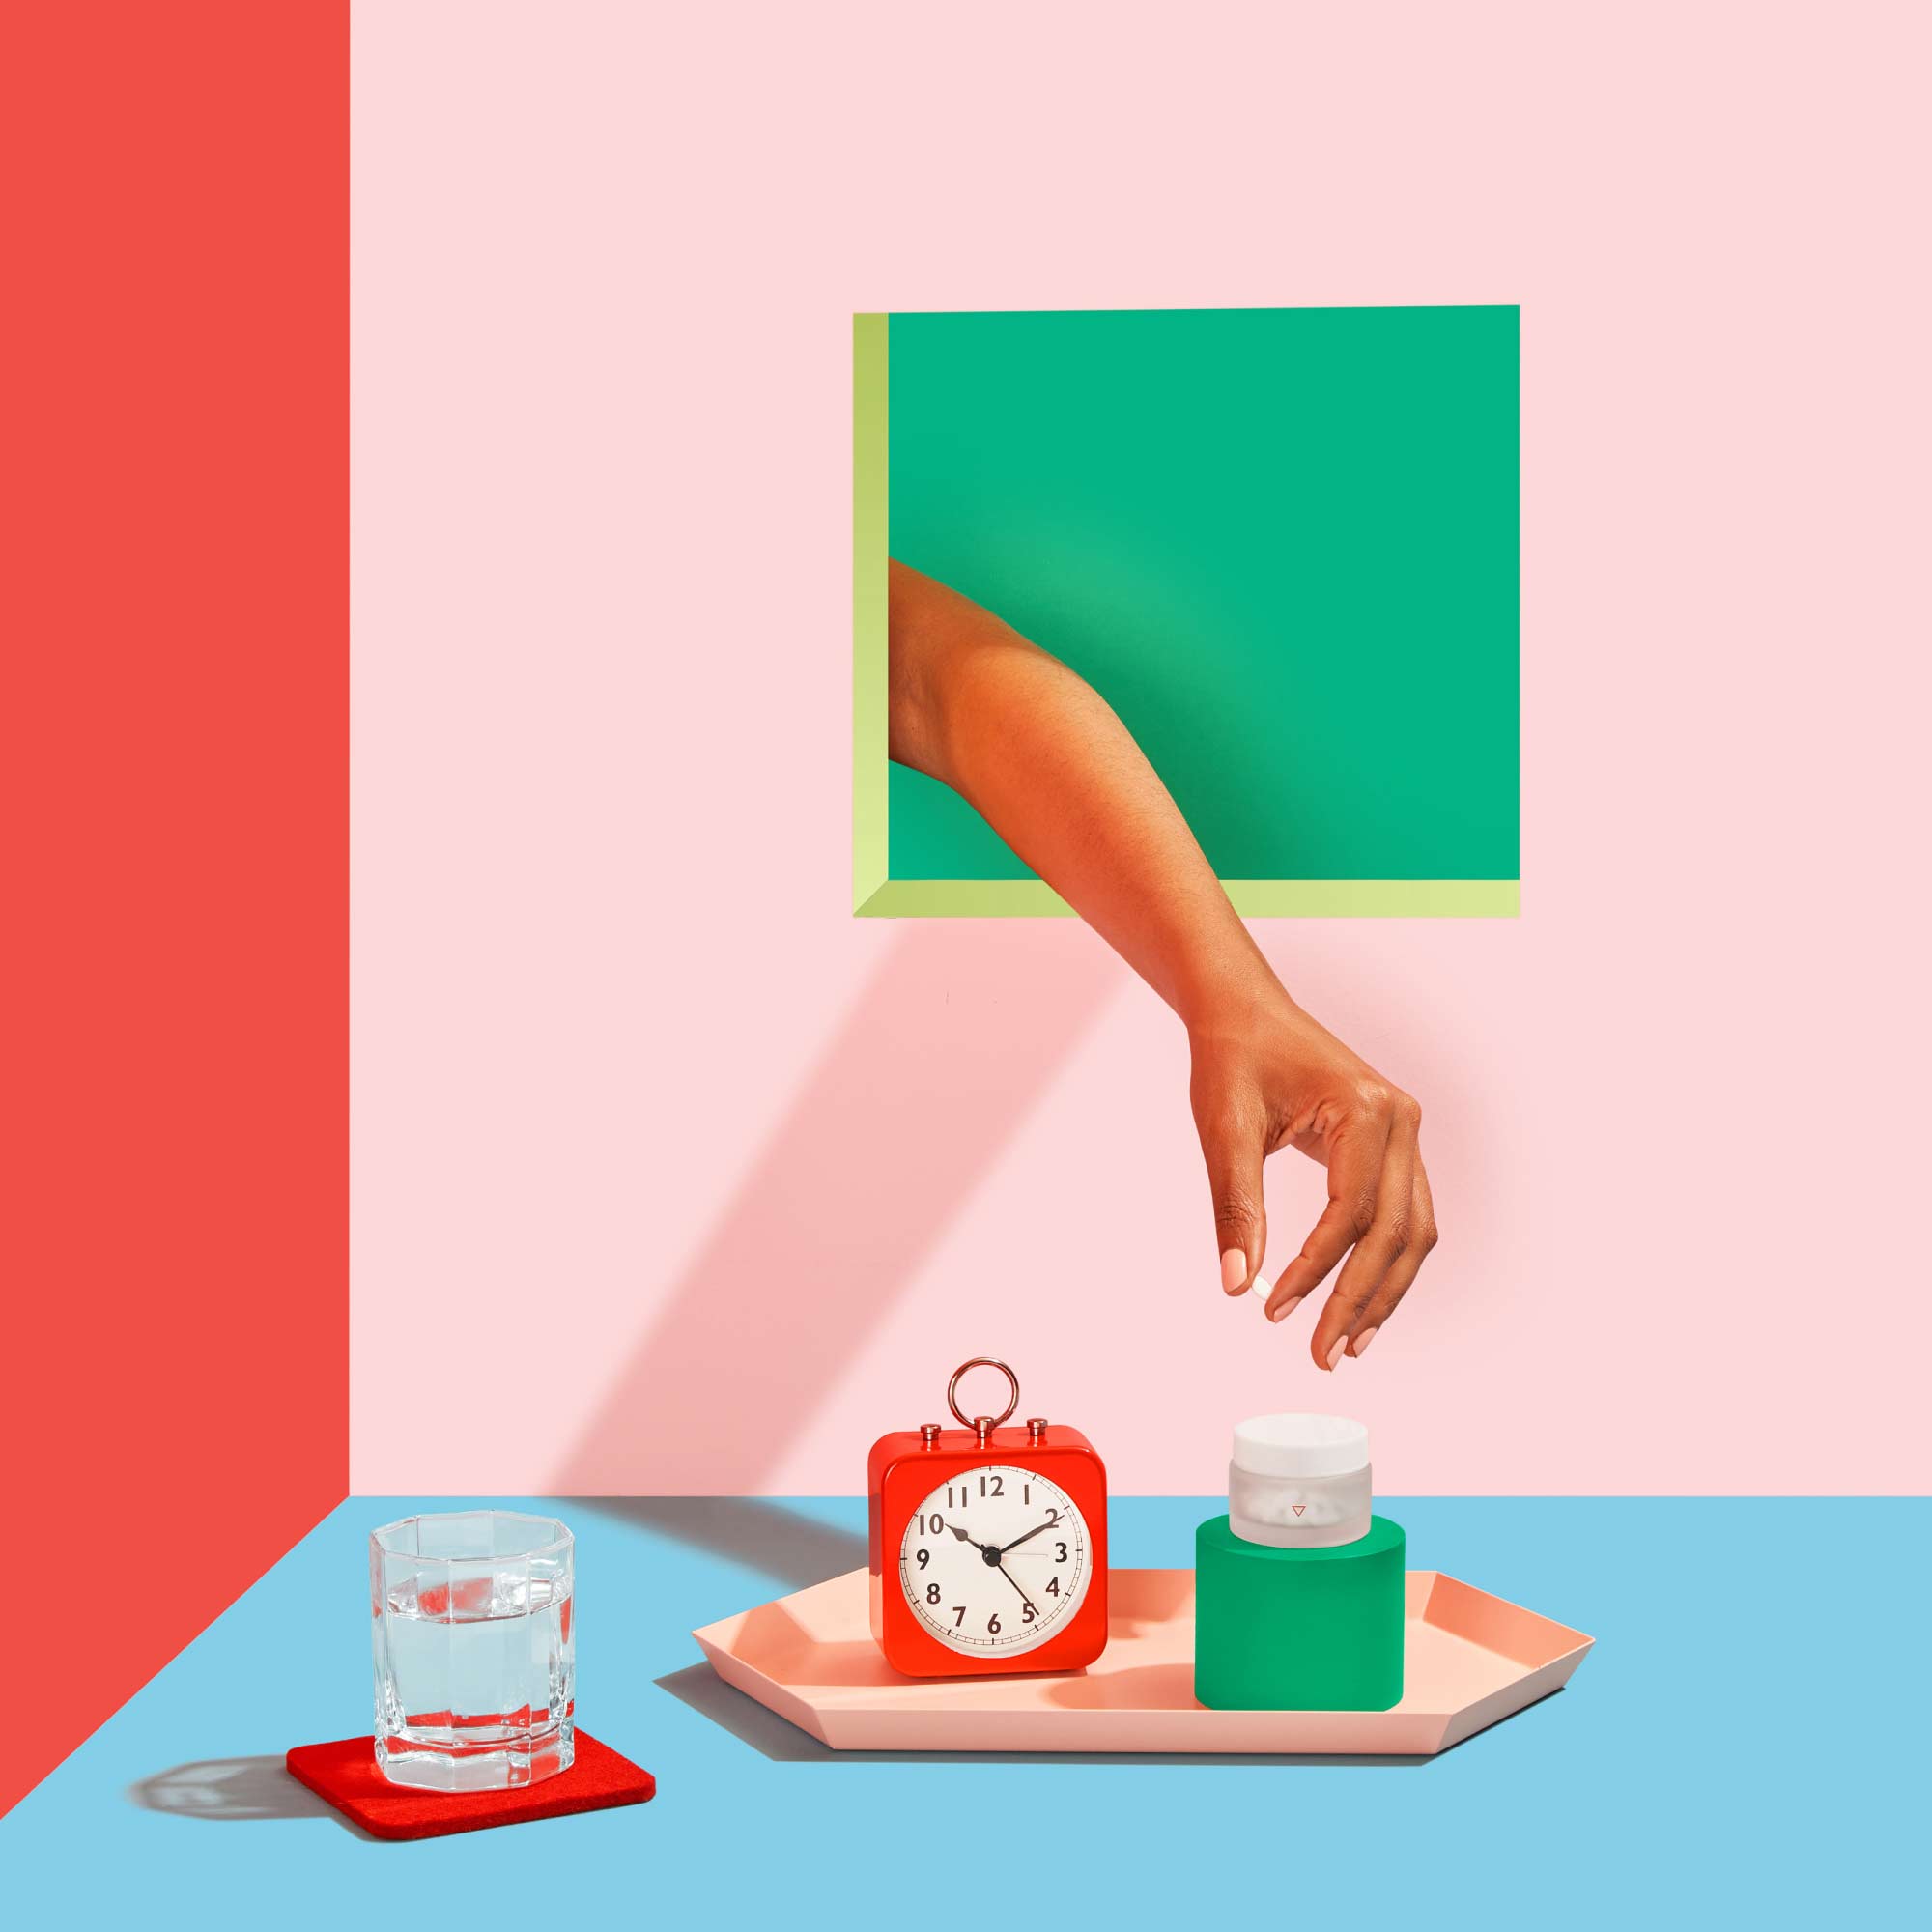 Hand reaching for Norethindrone pills next to an alarm clock, glass of water and colorful abstract shapes on a pink, red and blue background